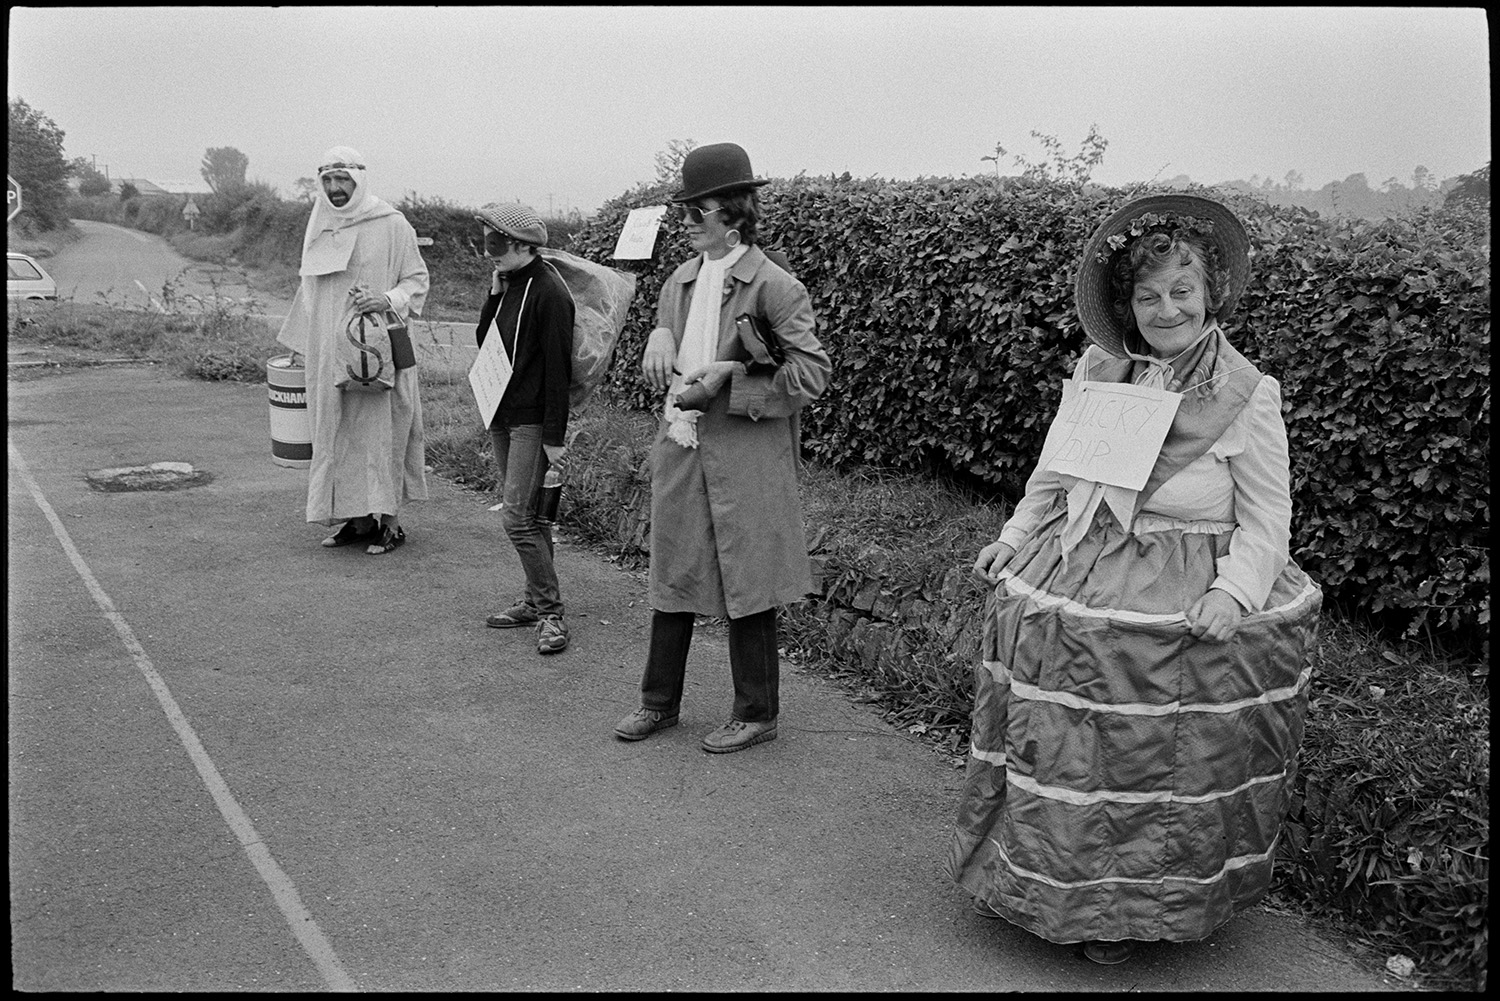 Fancy dress preparations, queen and attendants preparing for parade with brass band. 
[Four adults in fancy dress at Chulmleigh Fair. One man is dressed as an oil sheik and another as a thief or robber.]